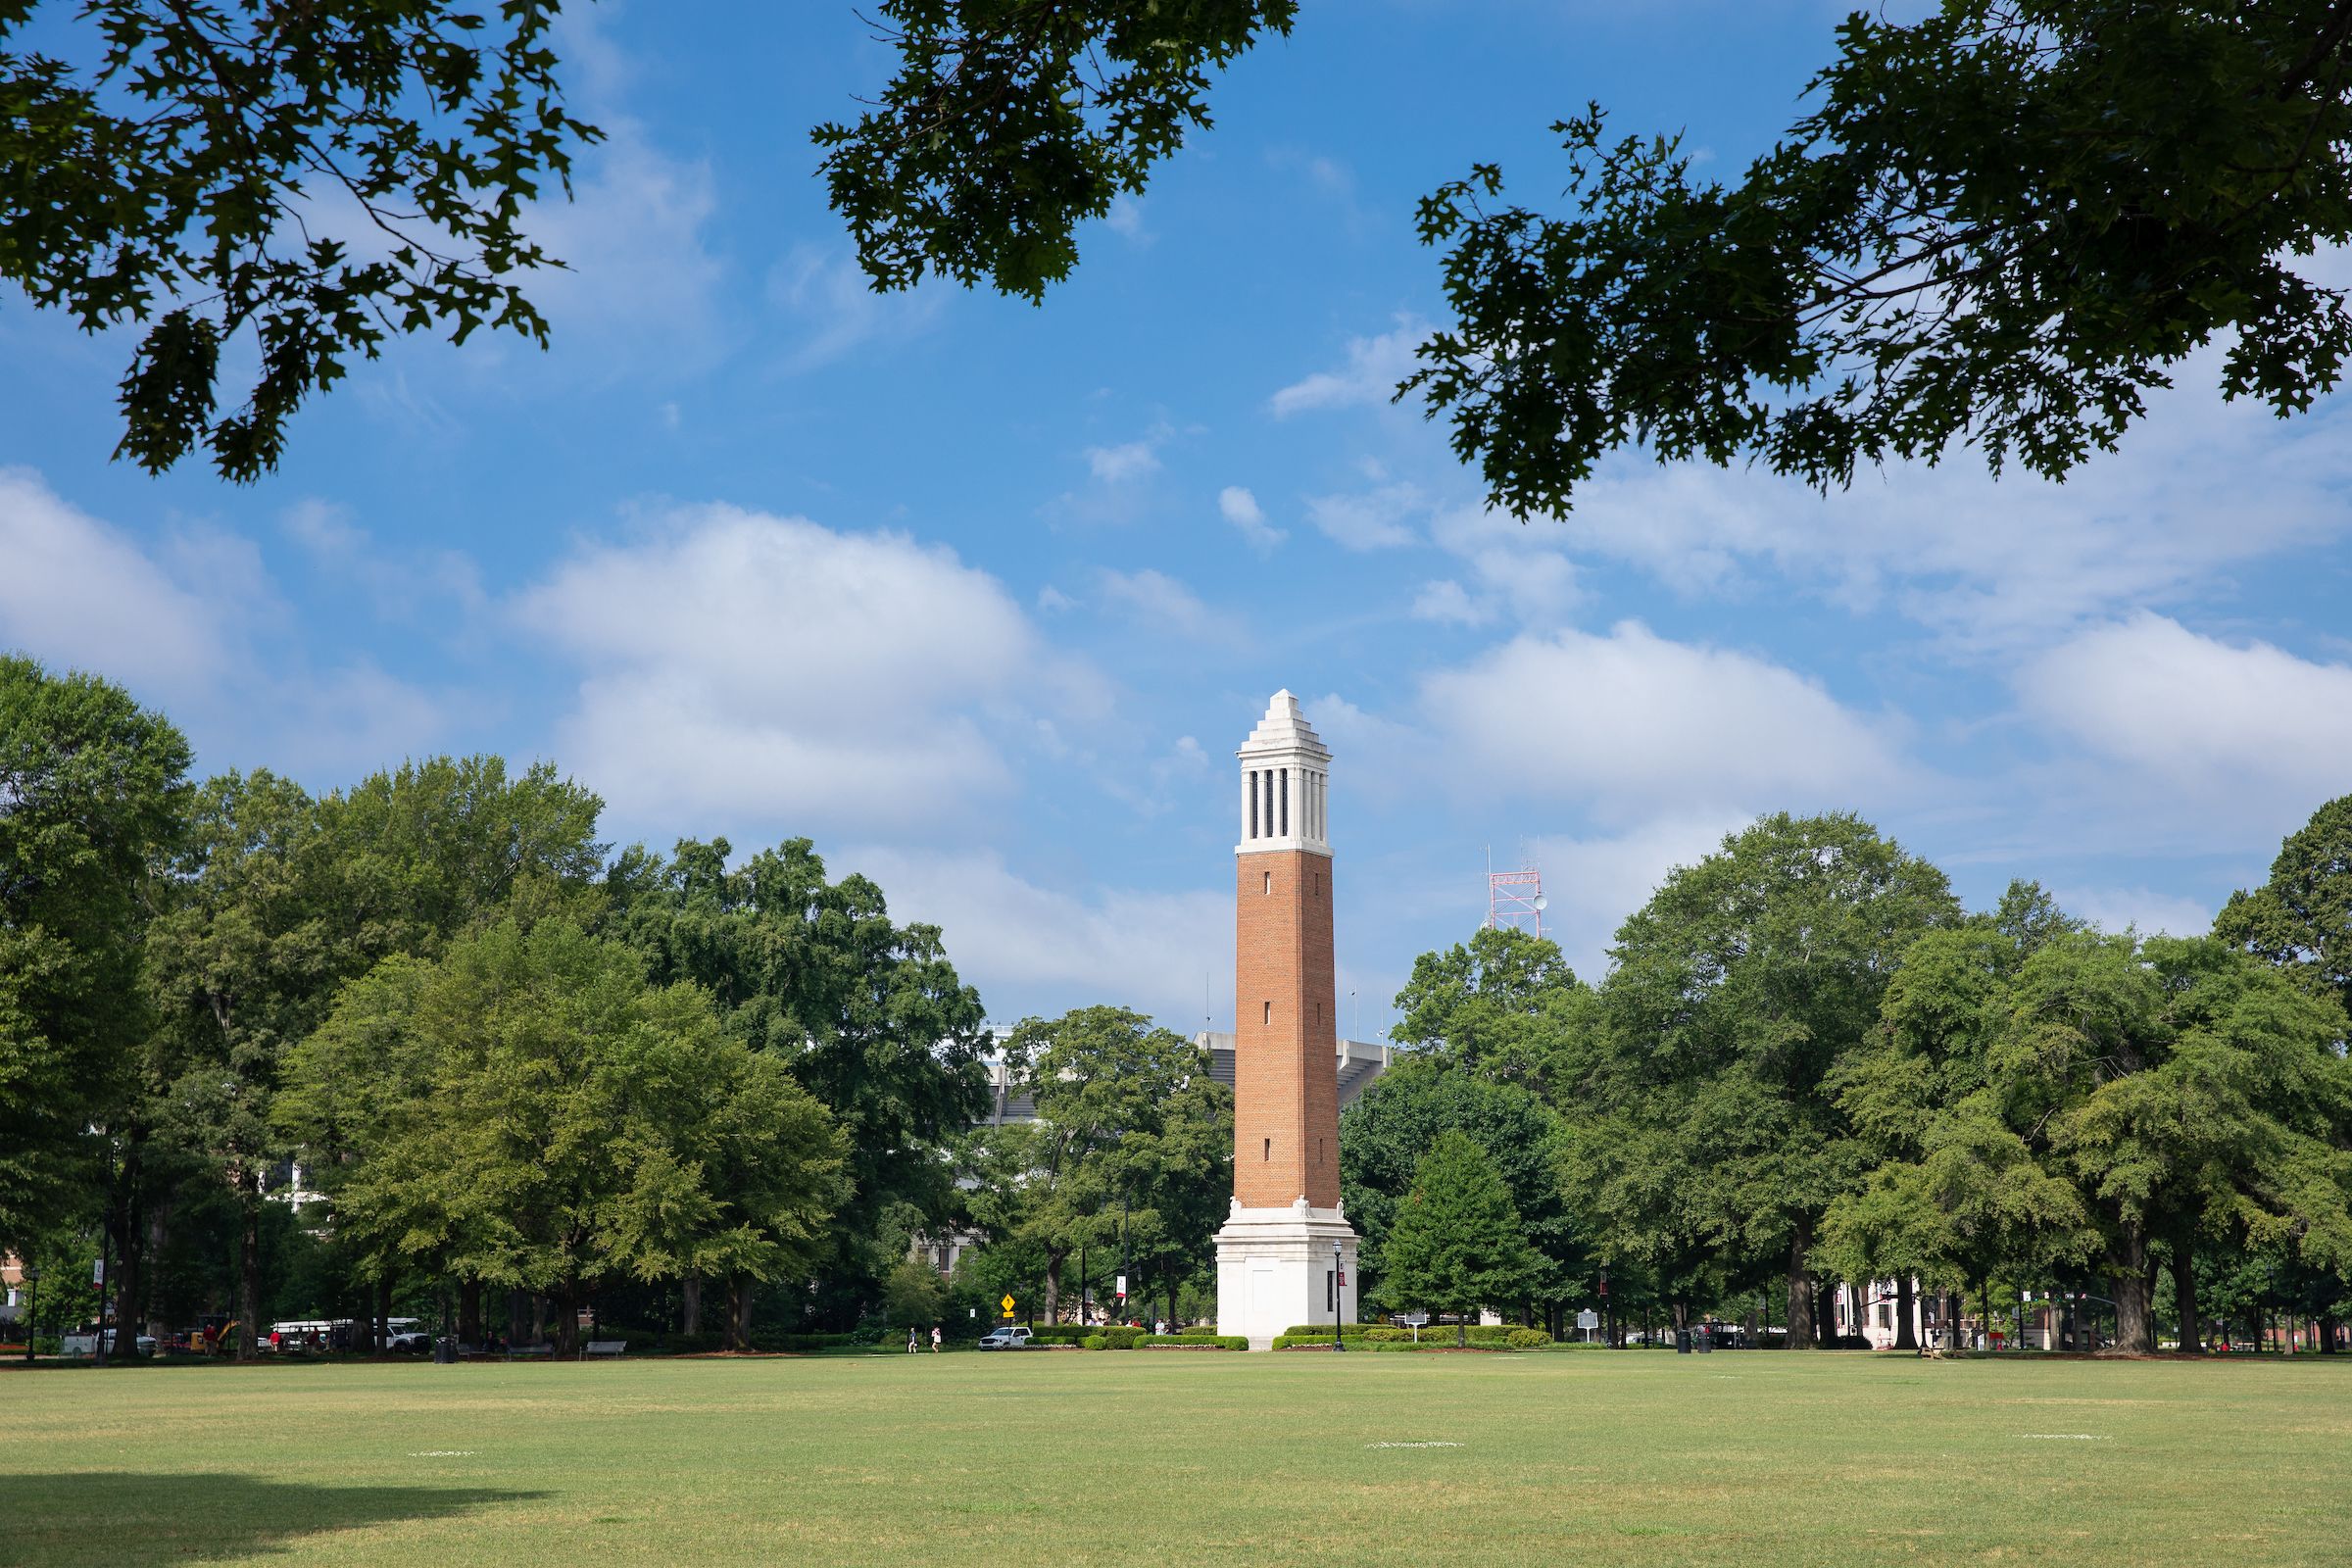 Outdoor Carillon Concert Series Welcomes Visitors to Main Quad